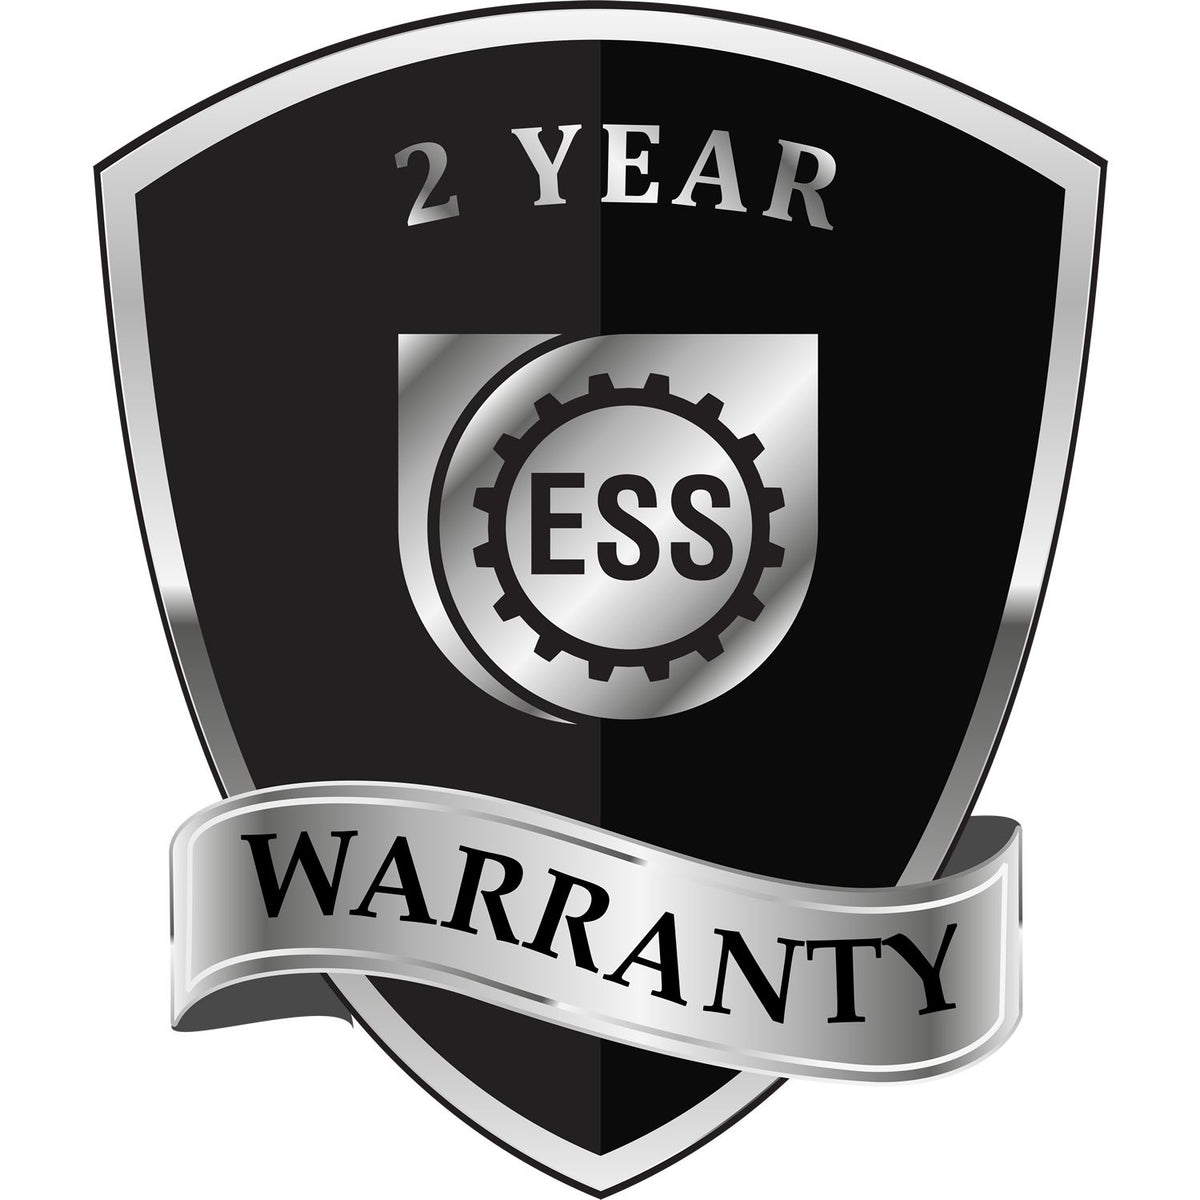 A black and silver badge or emblem showing warranty information for the Handheld Kentucky Professional Geologist Embosser